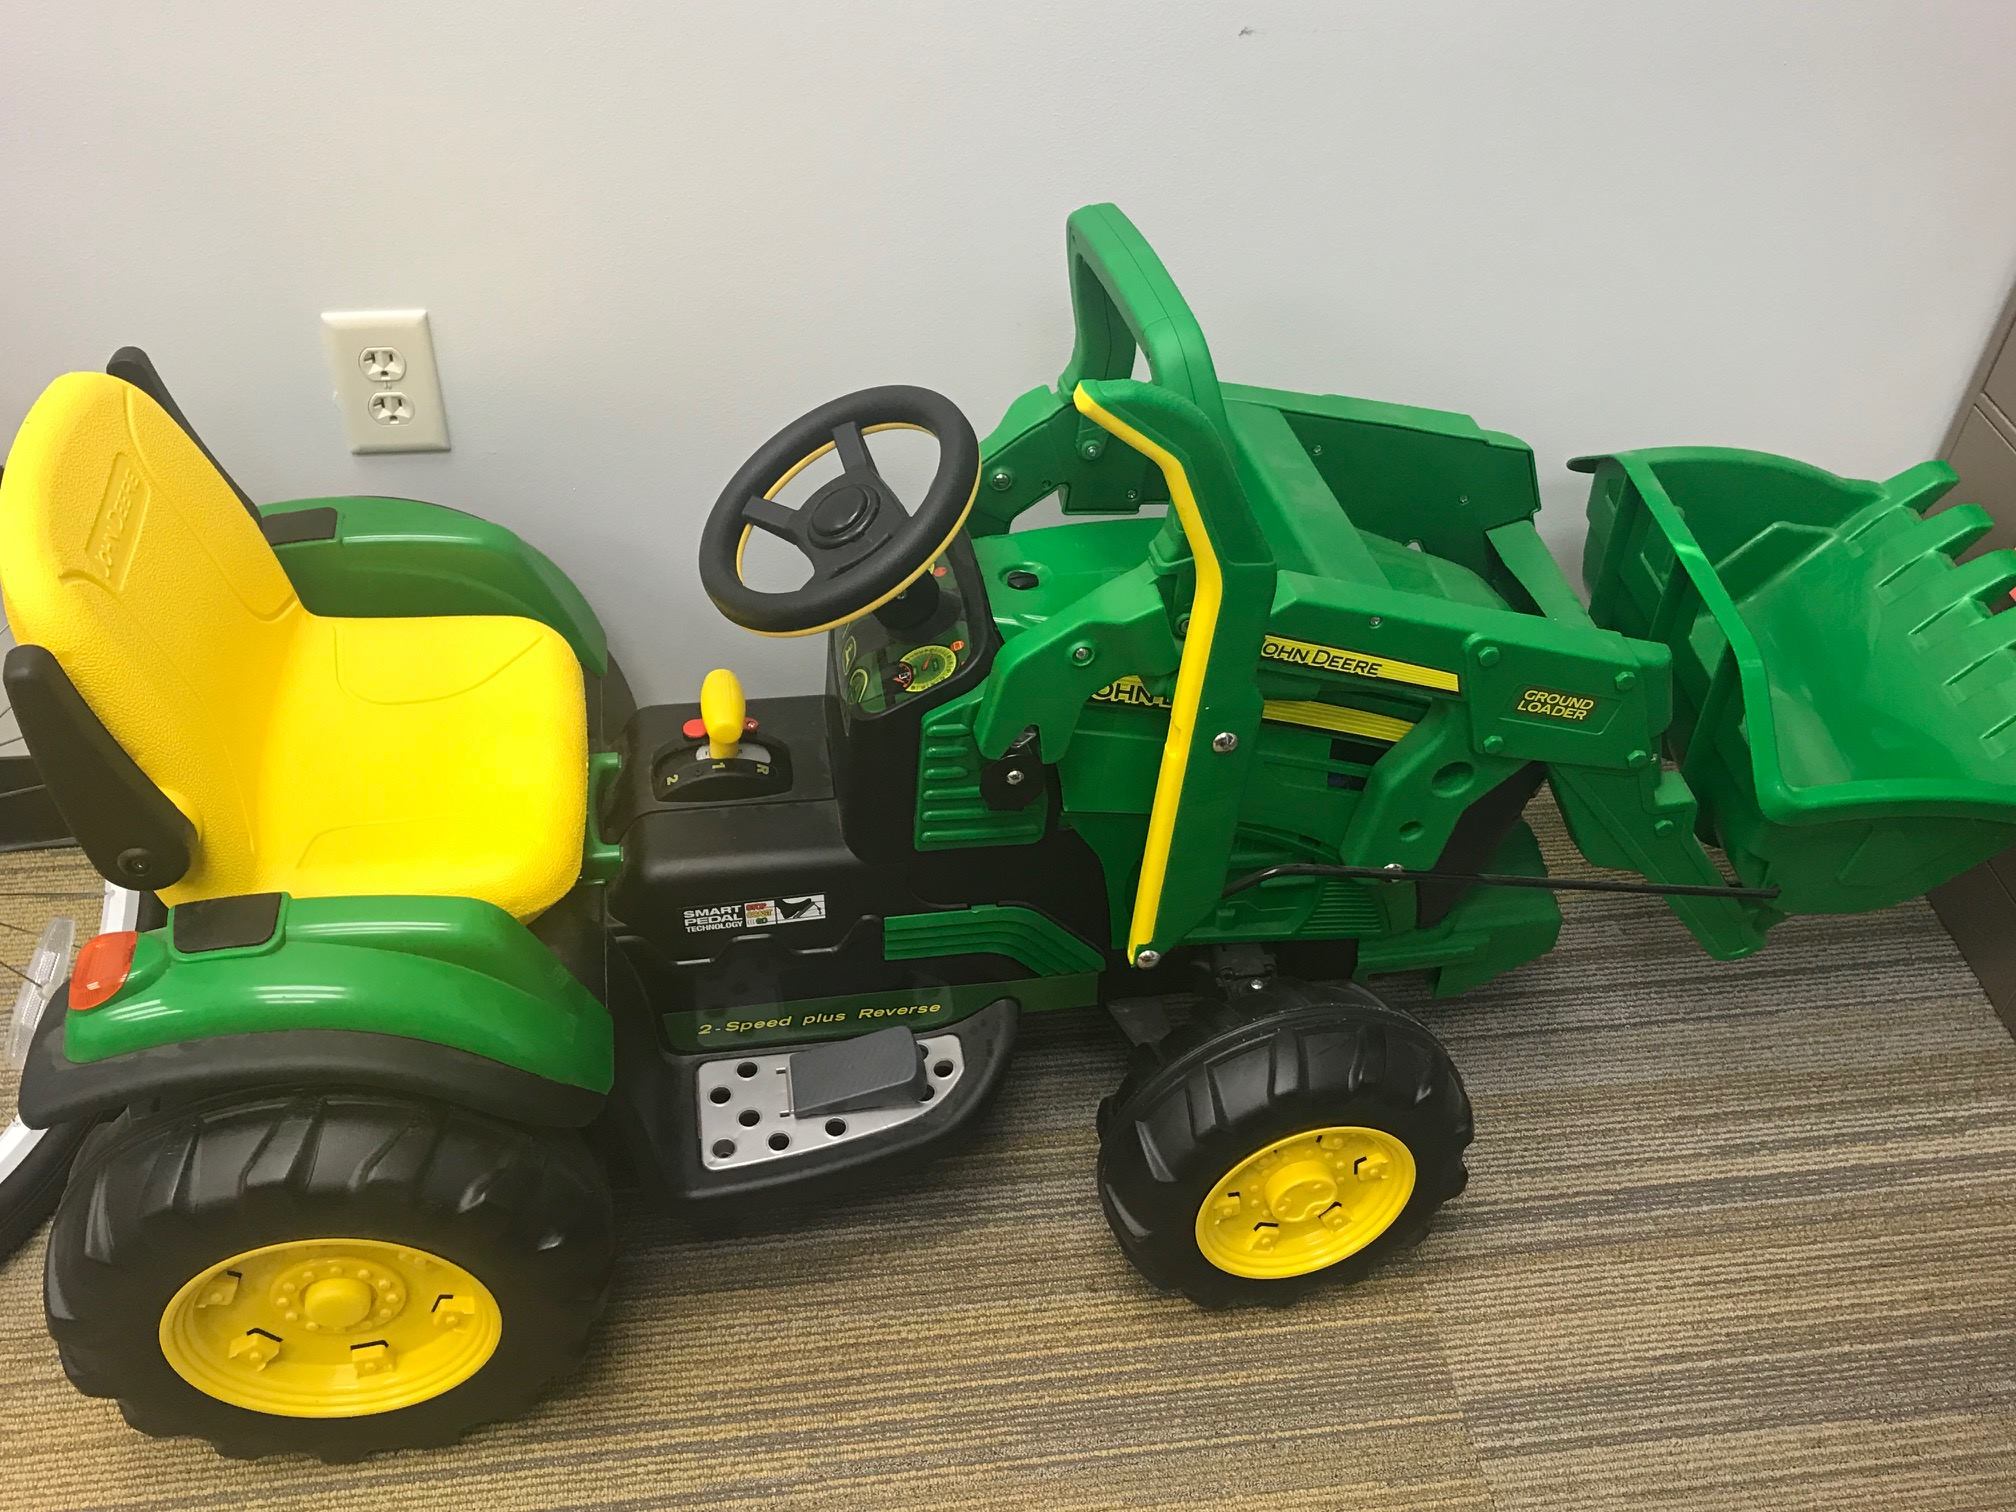 12-volt, ride-on tractor dontaed by American Implement